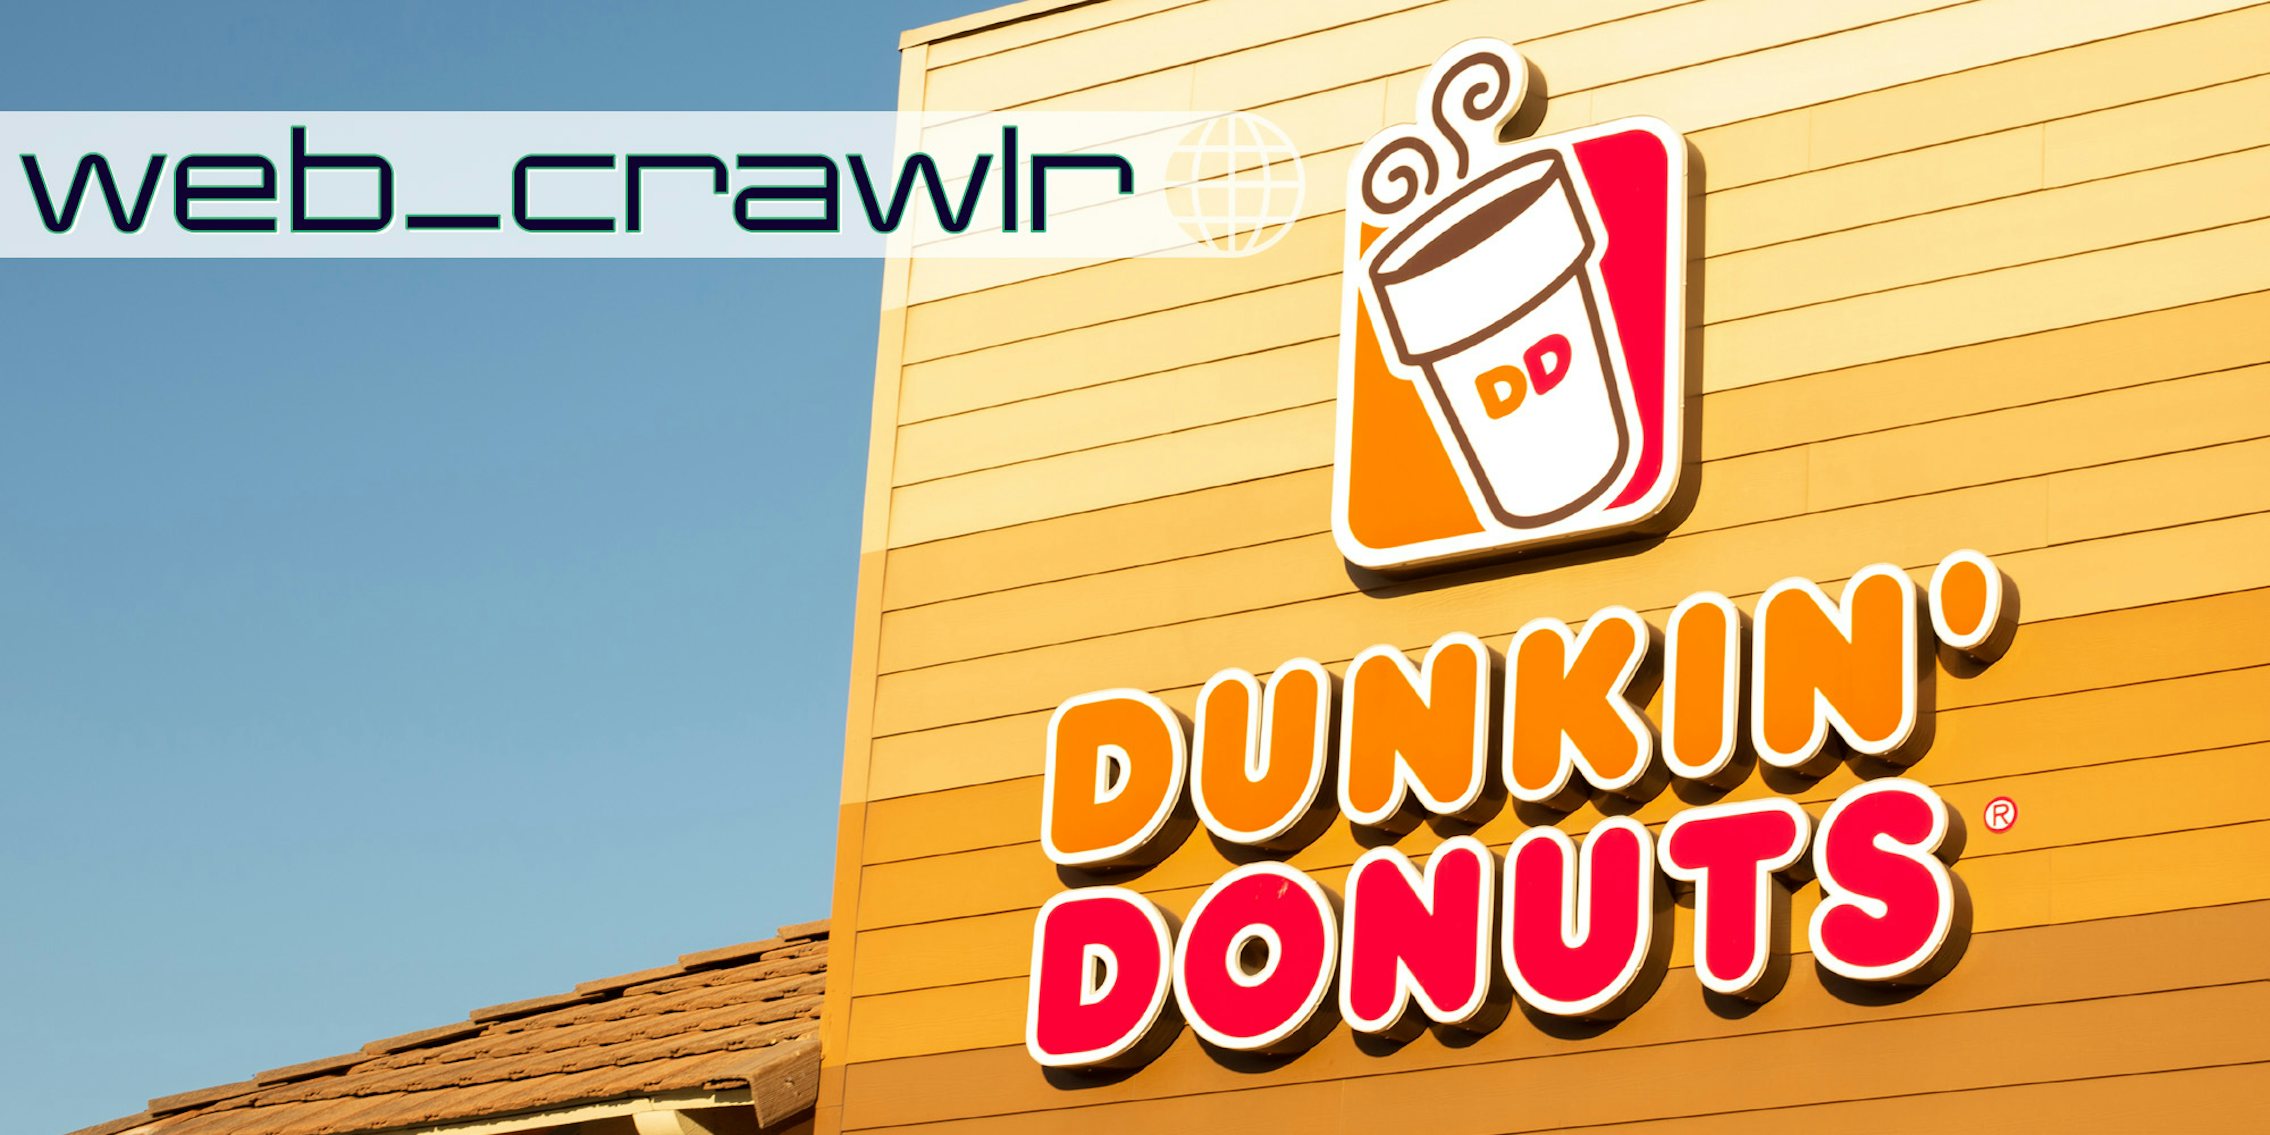 A Dunkin' Donuts sign on a building. The Daily Dot newsletter web_crawlr image is in the top left corner.